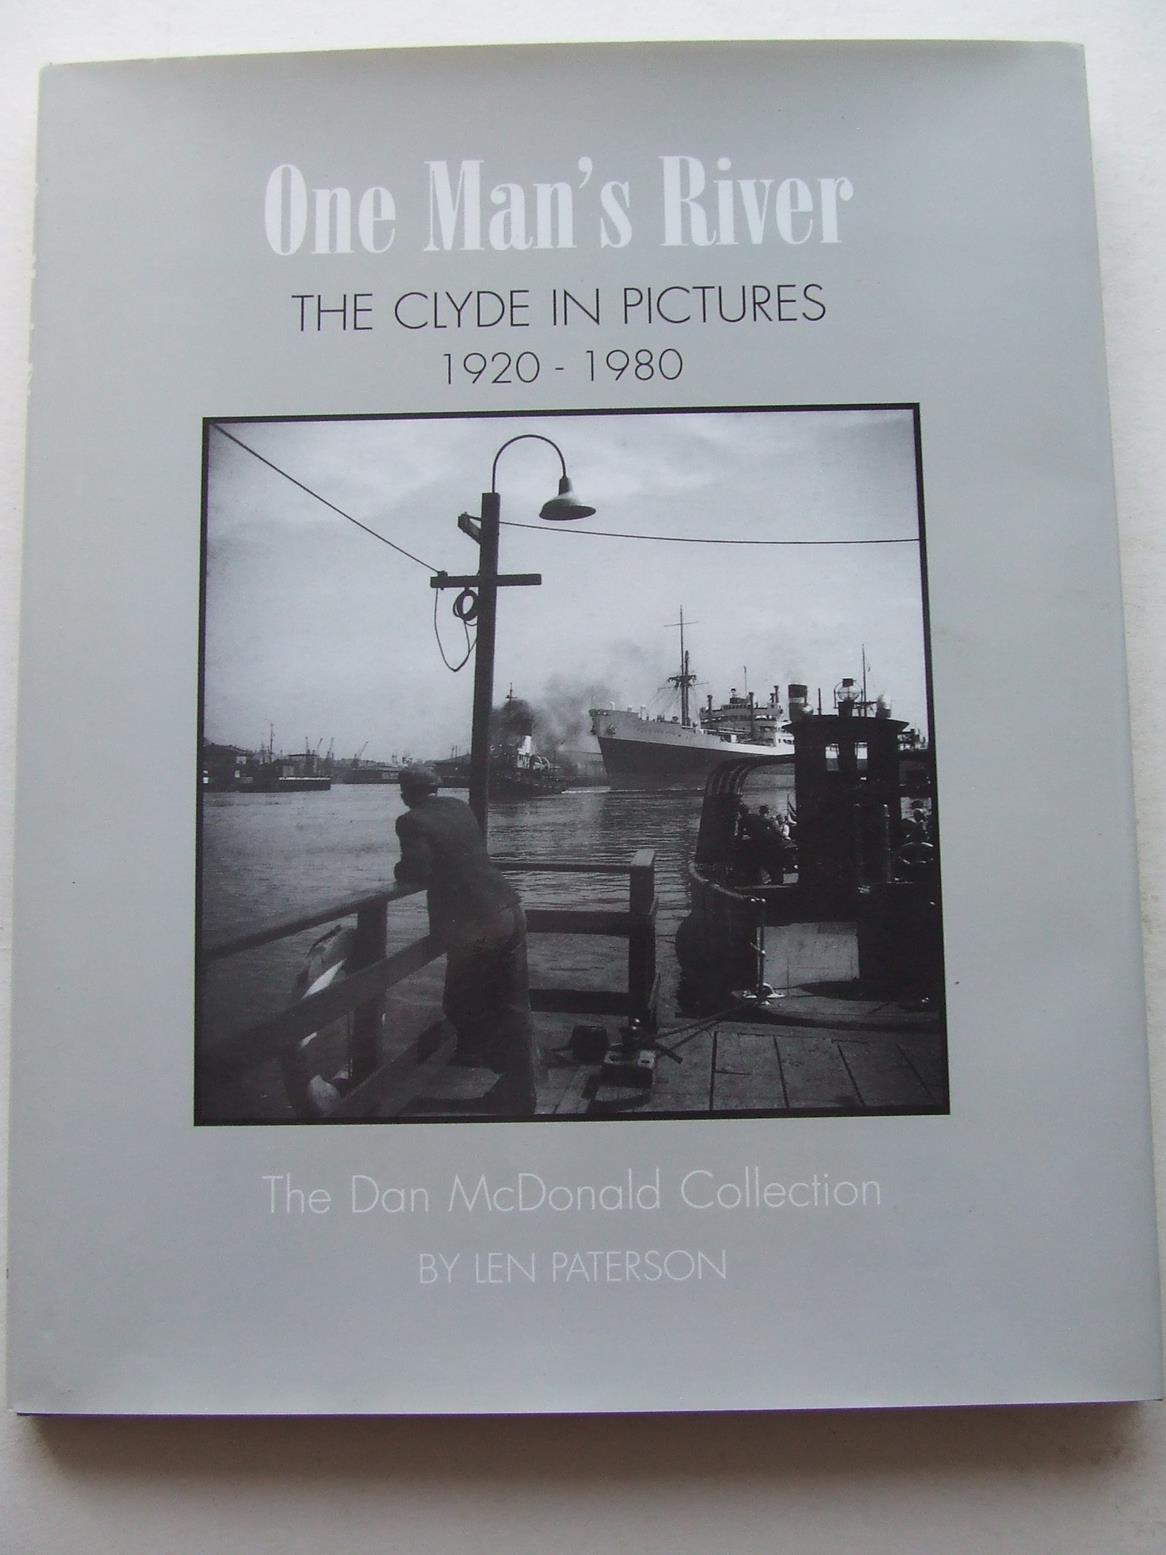 One Man's River, the Clyde in Pictures 1920-1980